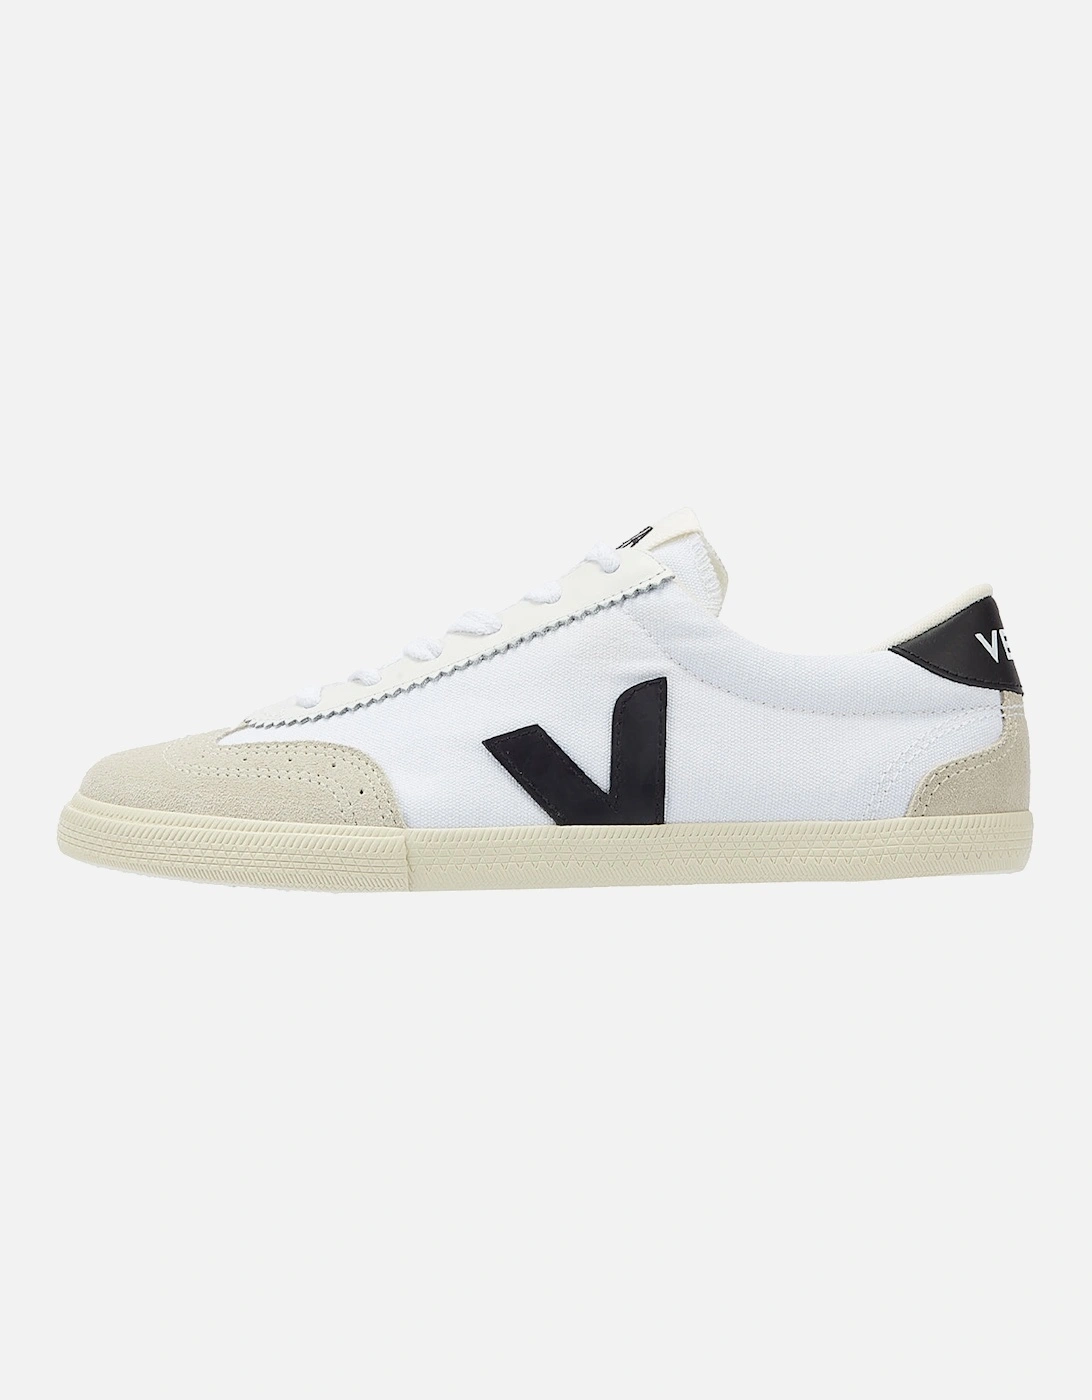 Volley Men's White/Black Trainers